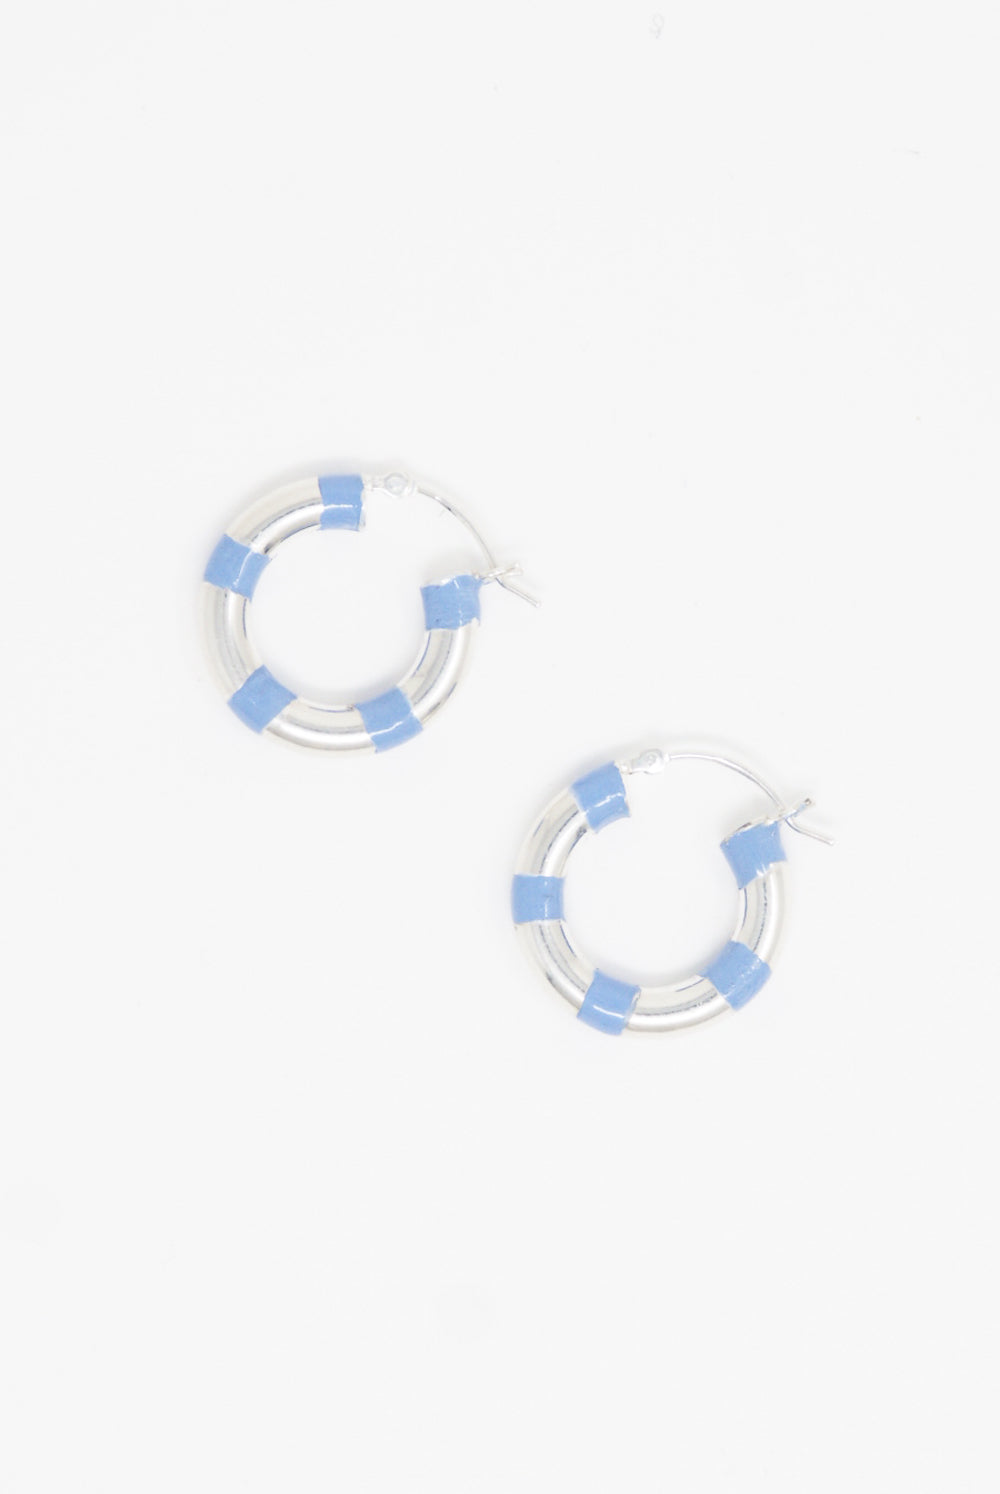 Abby Carnevale - Striped Hoops 20mm in Blue / Sterling Silver